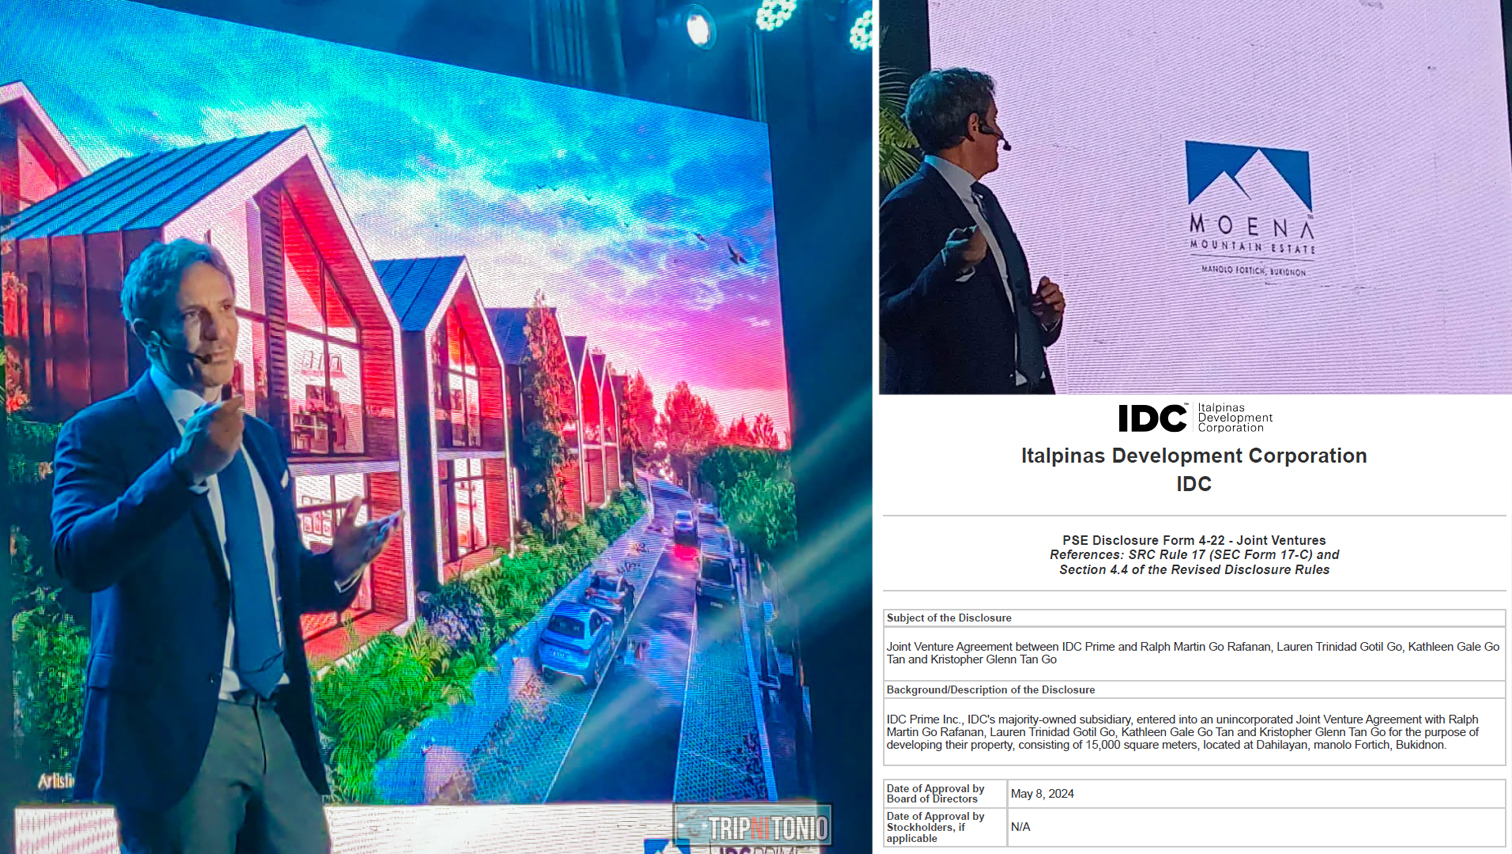 PROJECT WATCH: IDC Prime enters JV agreement for 1.5-hectare Dahilayan property